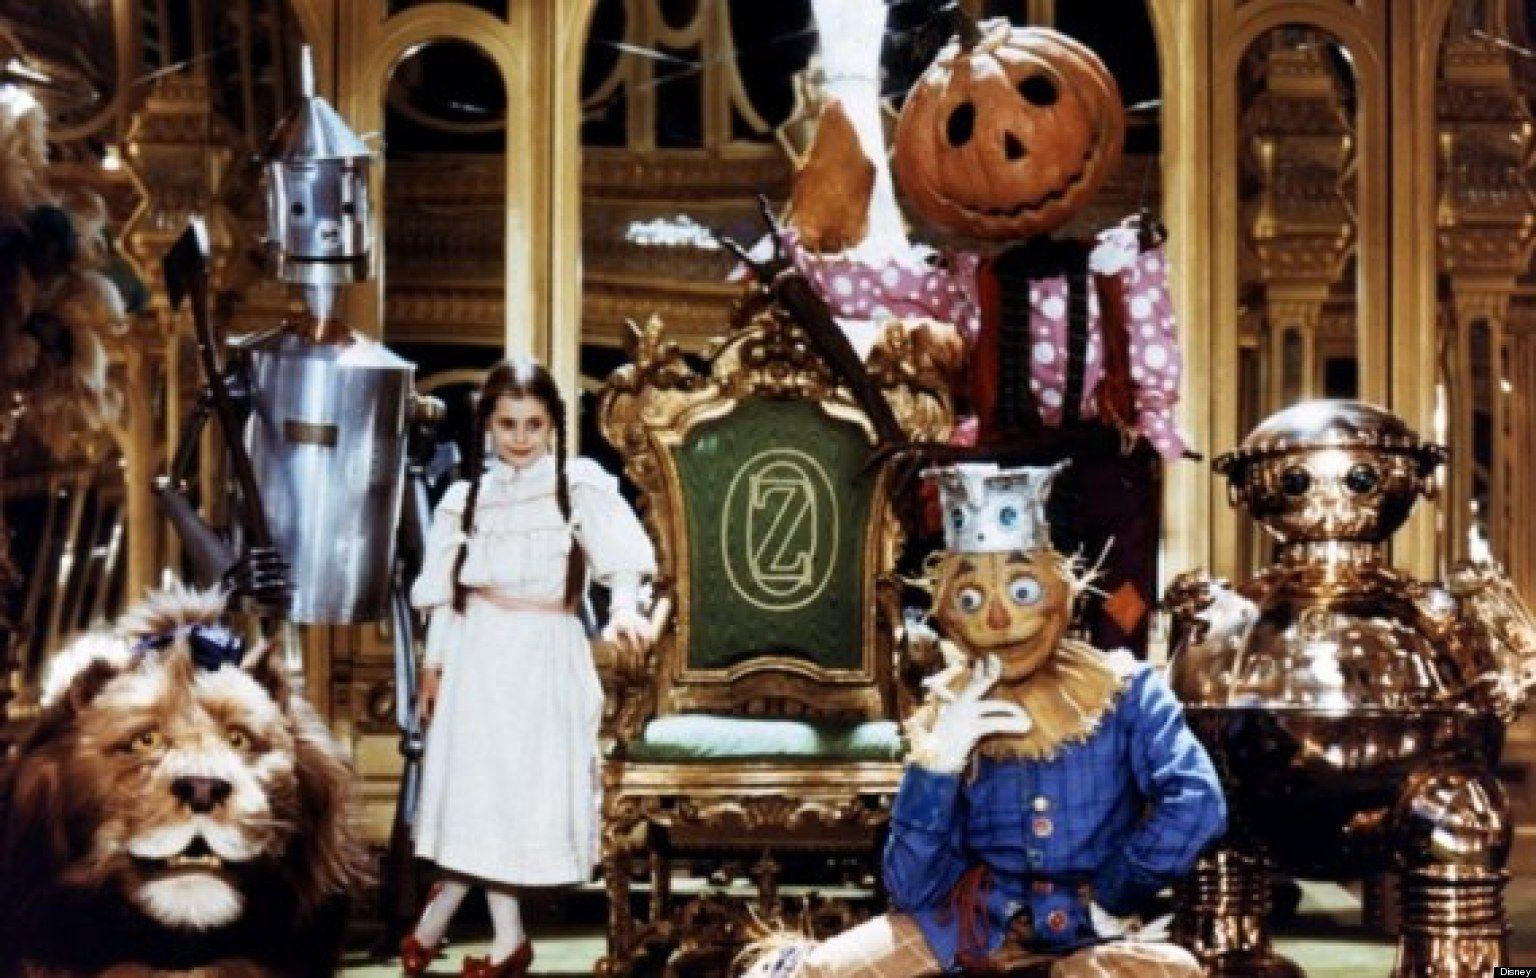 return to Oz, they looked to Oz Image, Picture, Photo